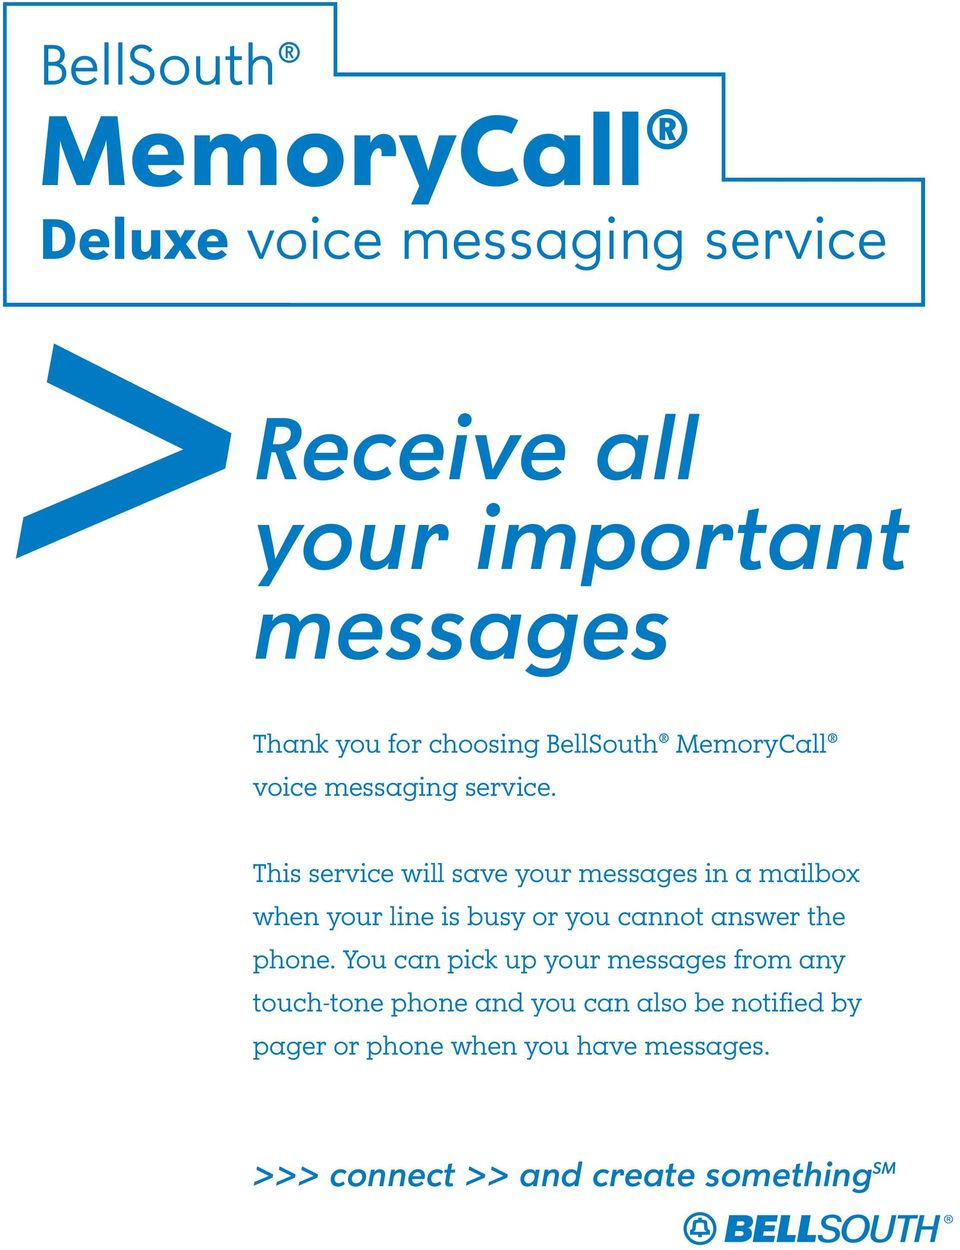 This service will save your messages in a mailbox when your line is busy or you cannot answer the phone.